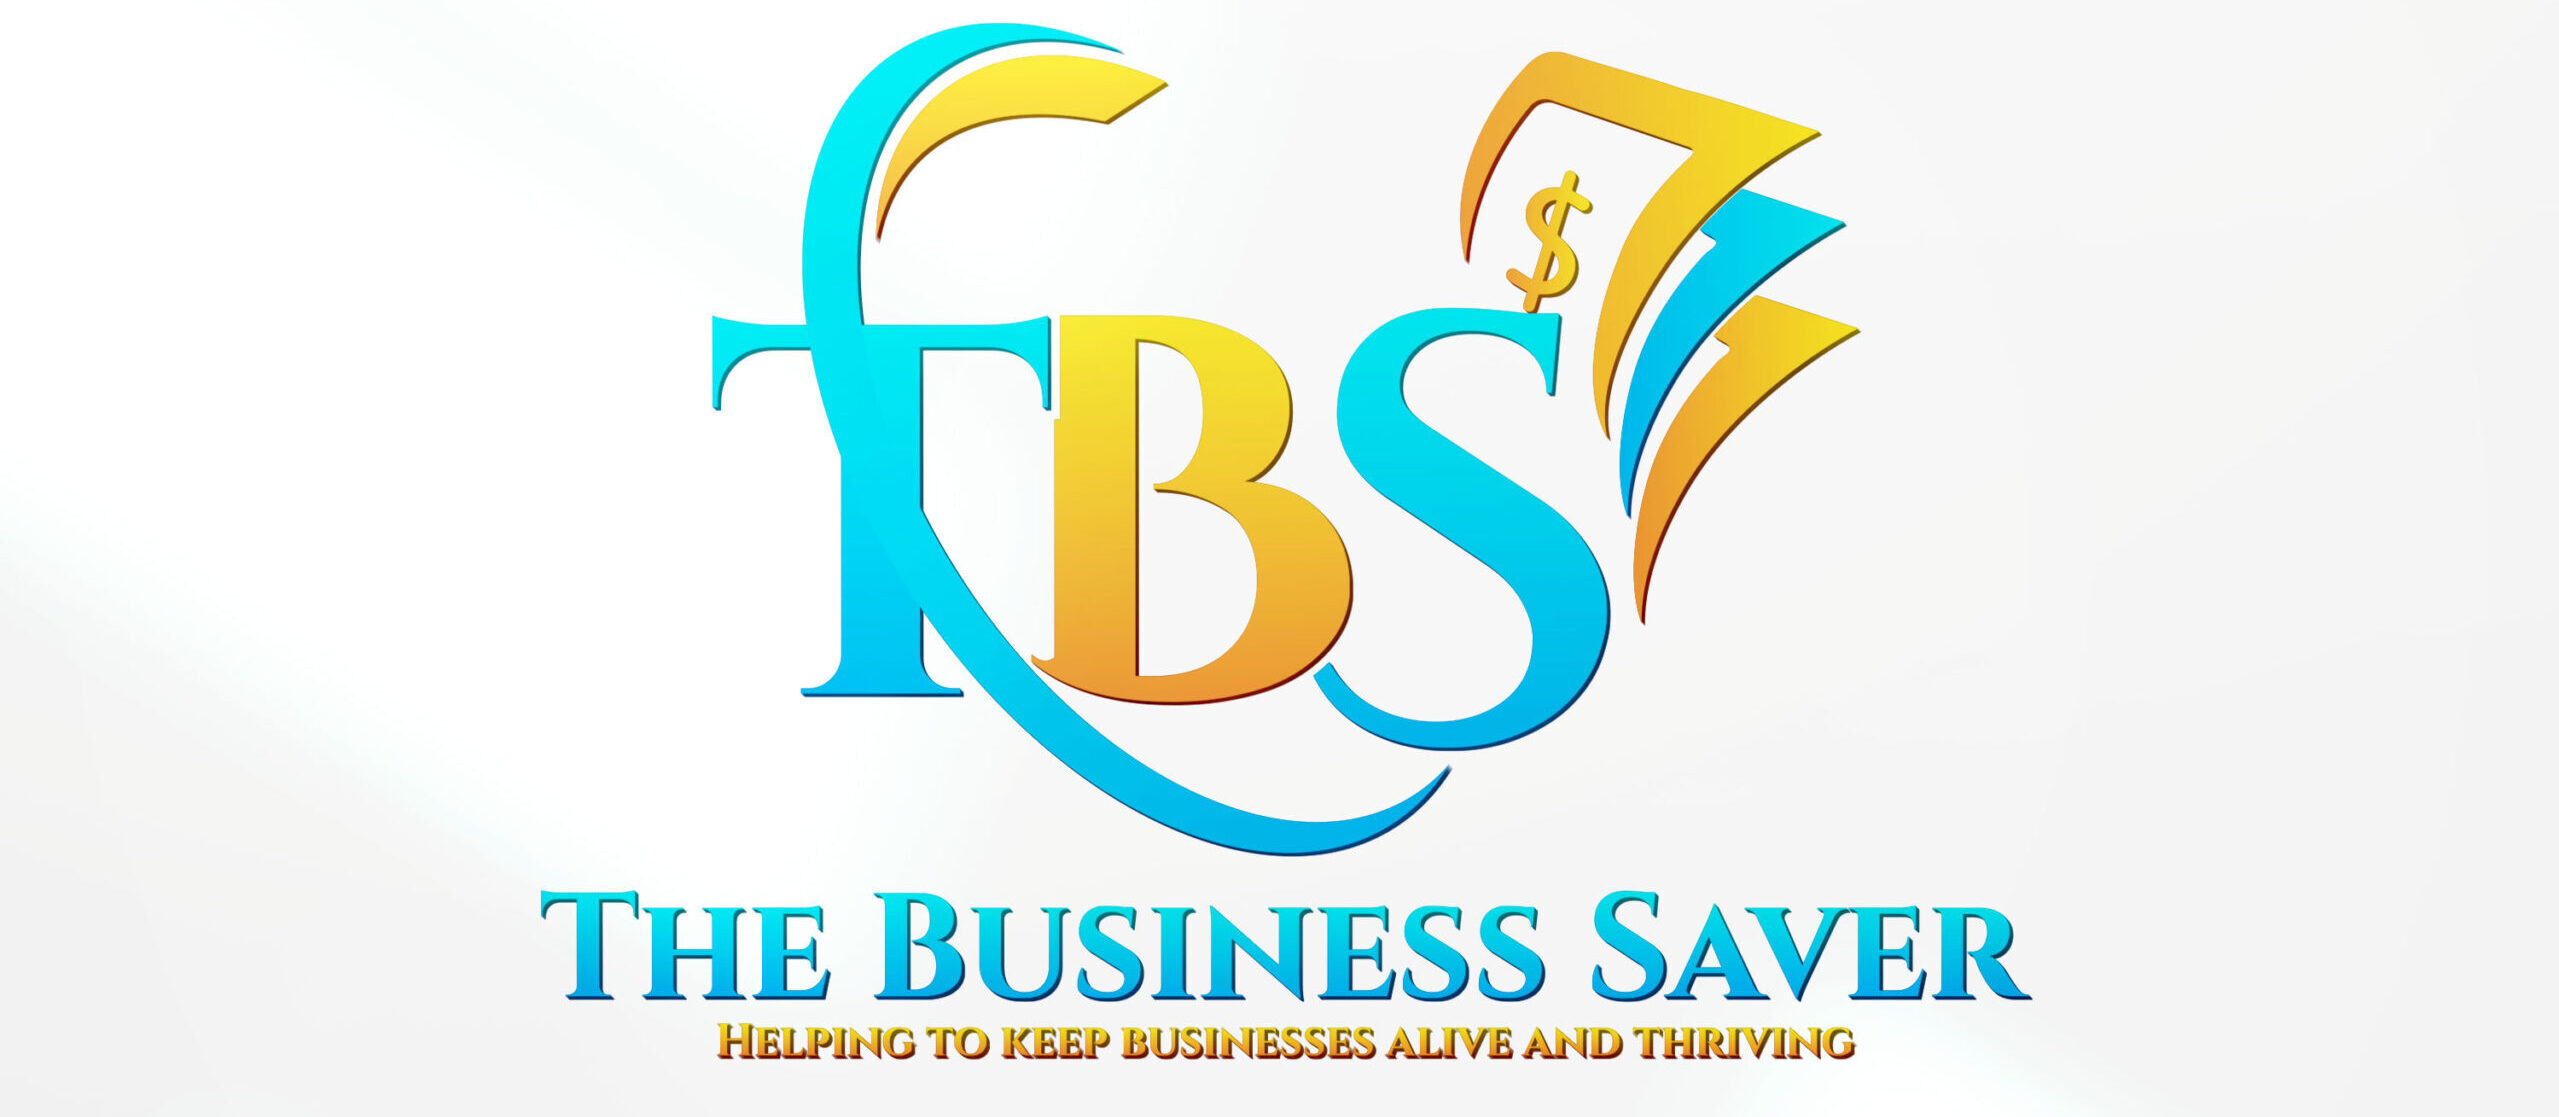 The Business Saver